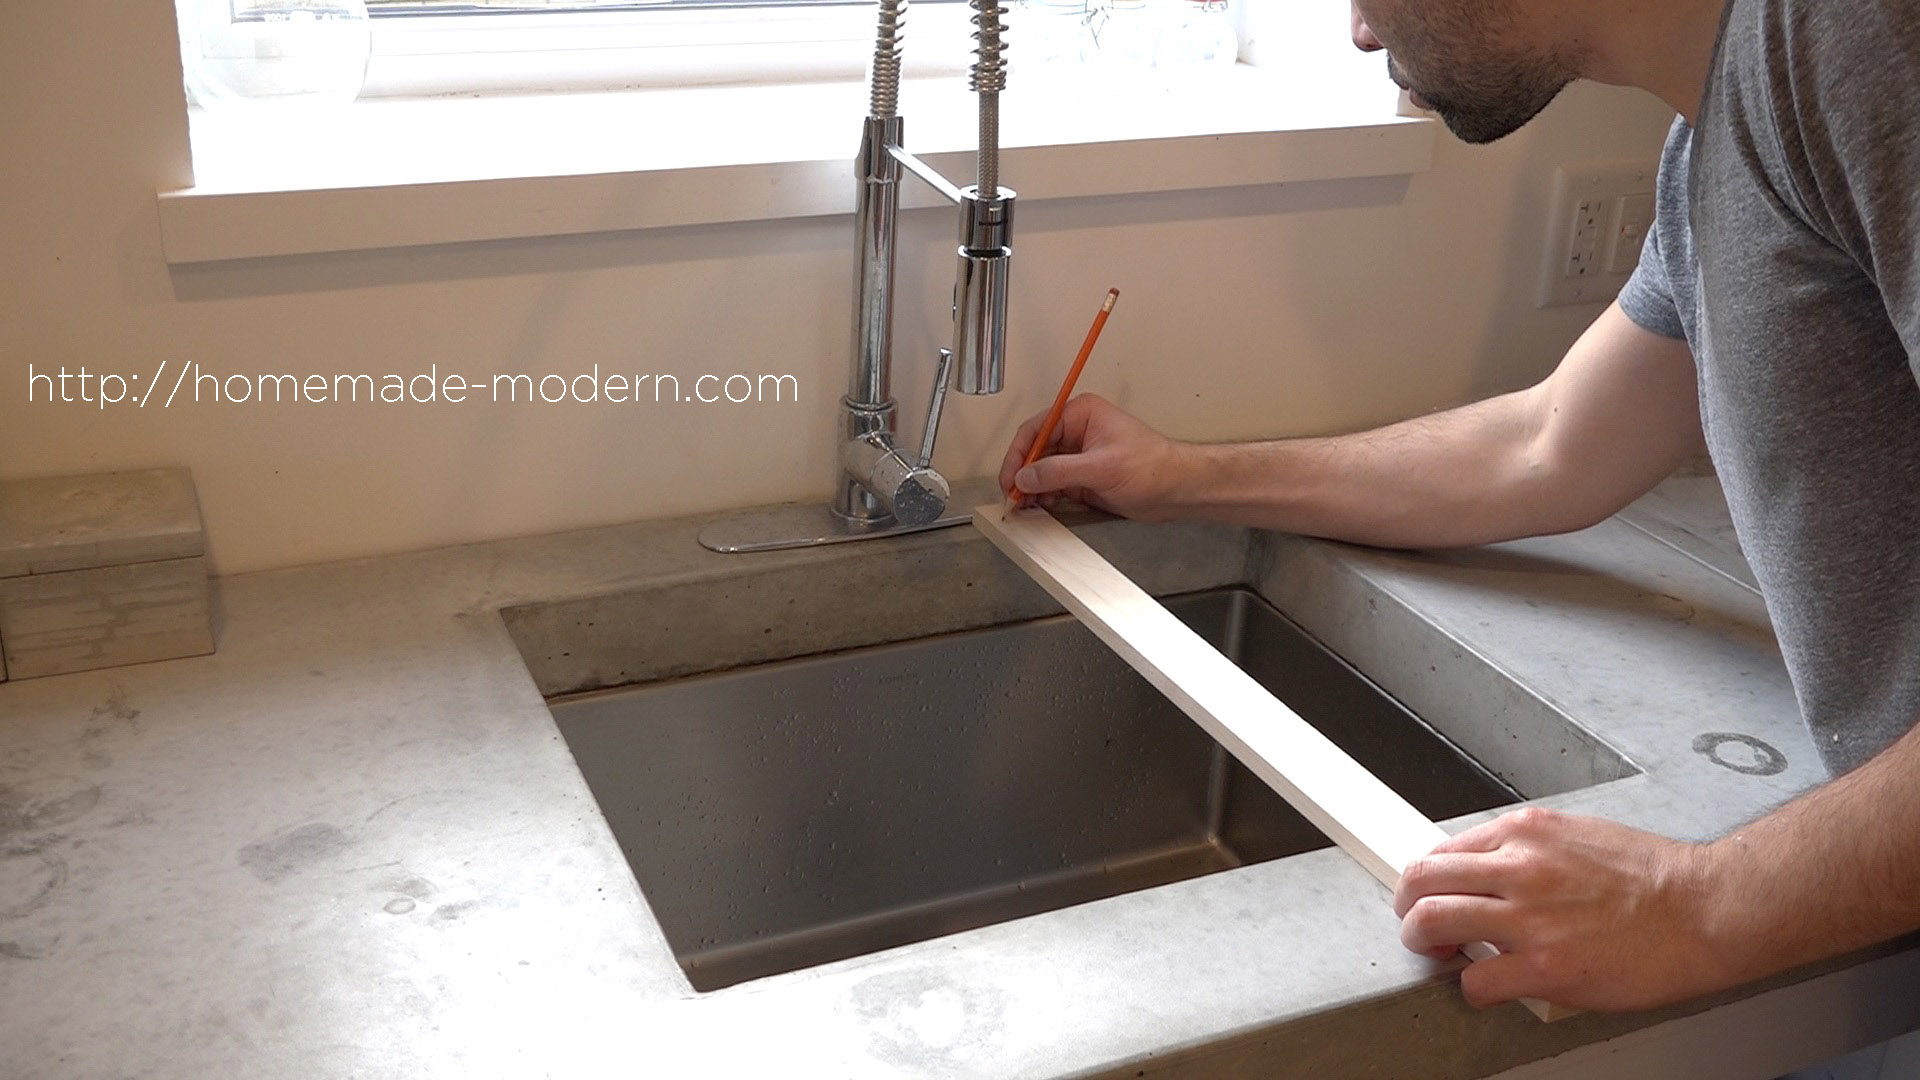 This DIY Dish Rack is designed to fit over a sink. Full instructions can be found at HomeMade-Modern.com